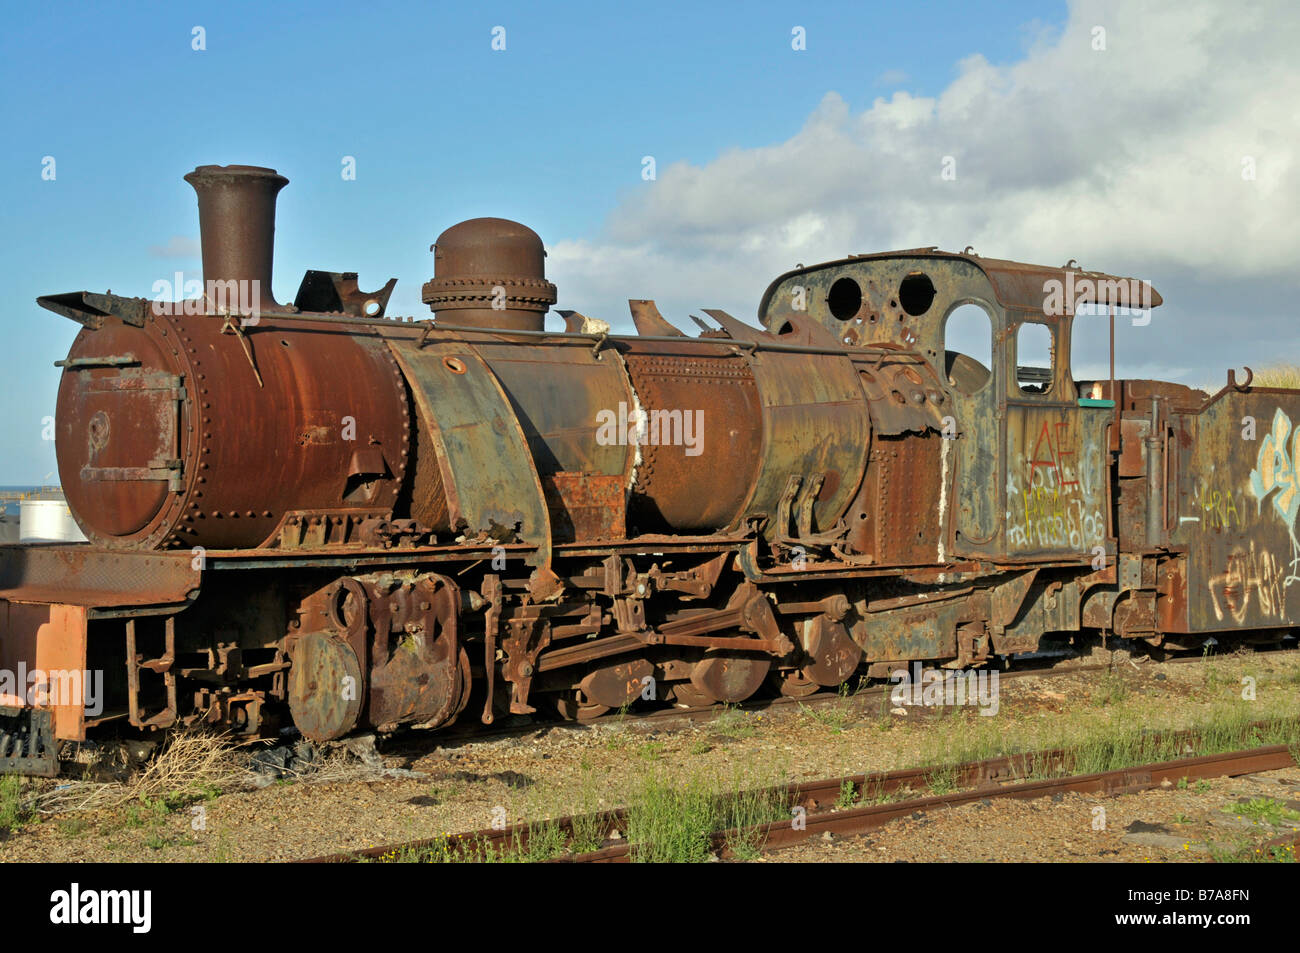 Corroded steam locomotive at the Port Elisabeth train cemetery, South Africa, Africa Stock Photo